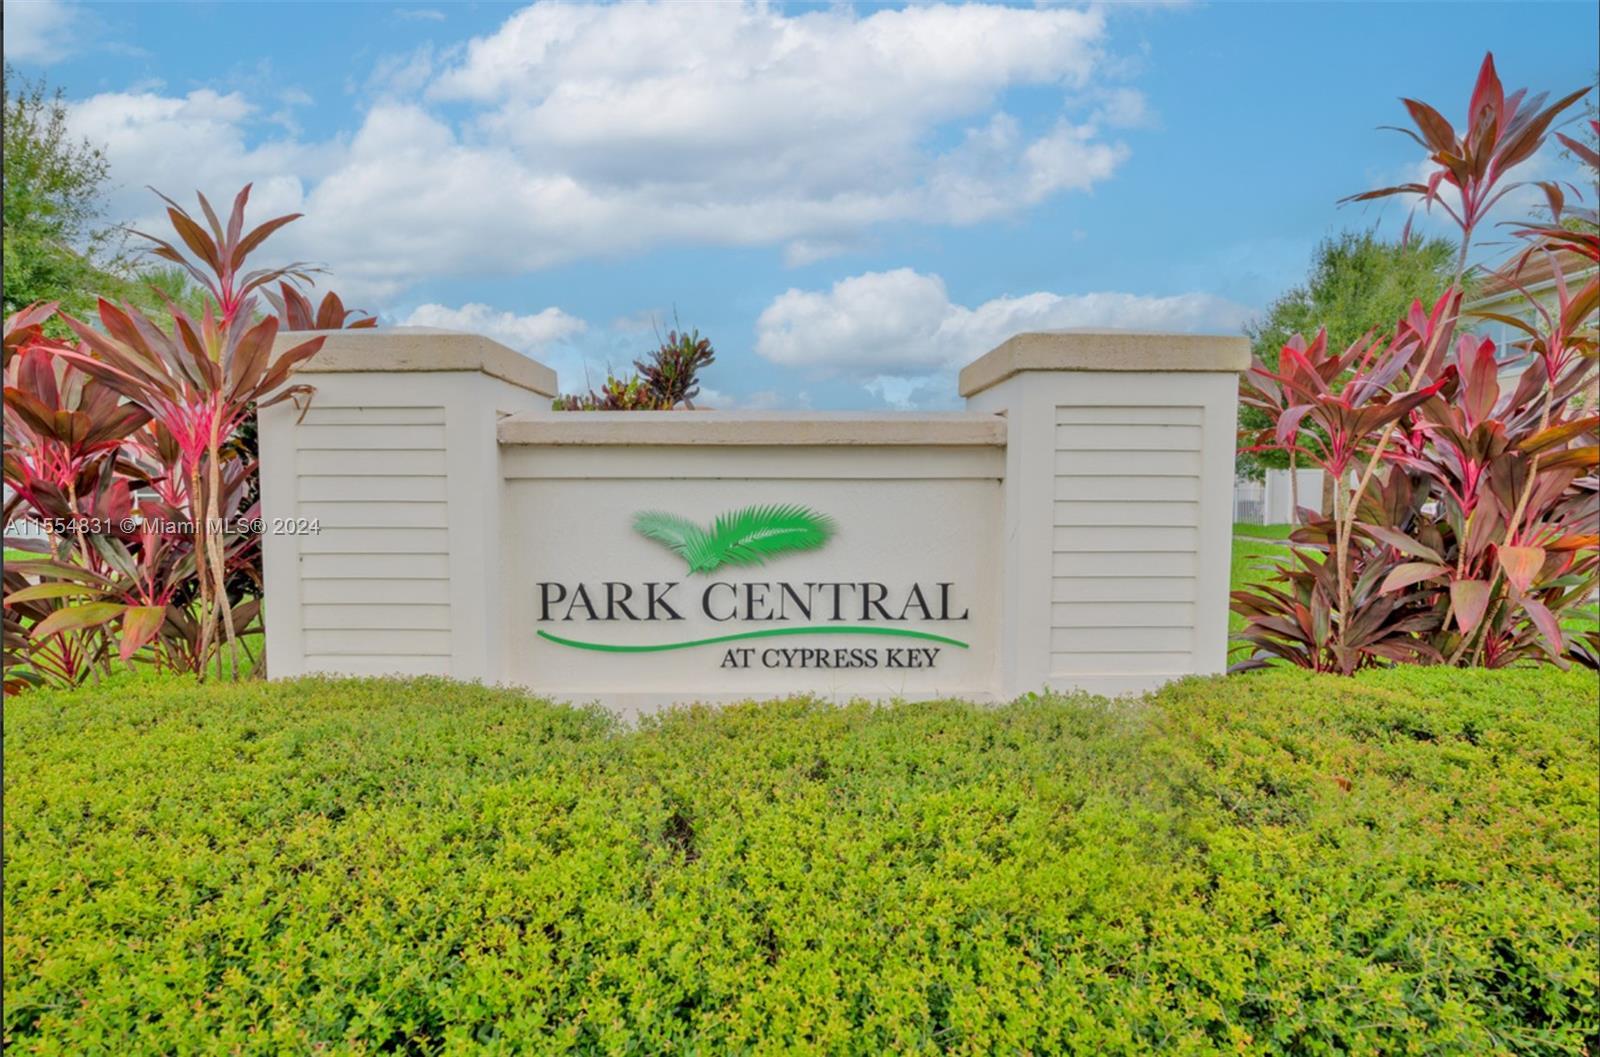 Photo of 12053 Prk Central #12053 in Royal Palm Beach, FL